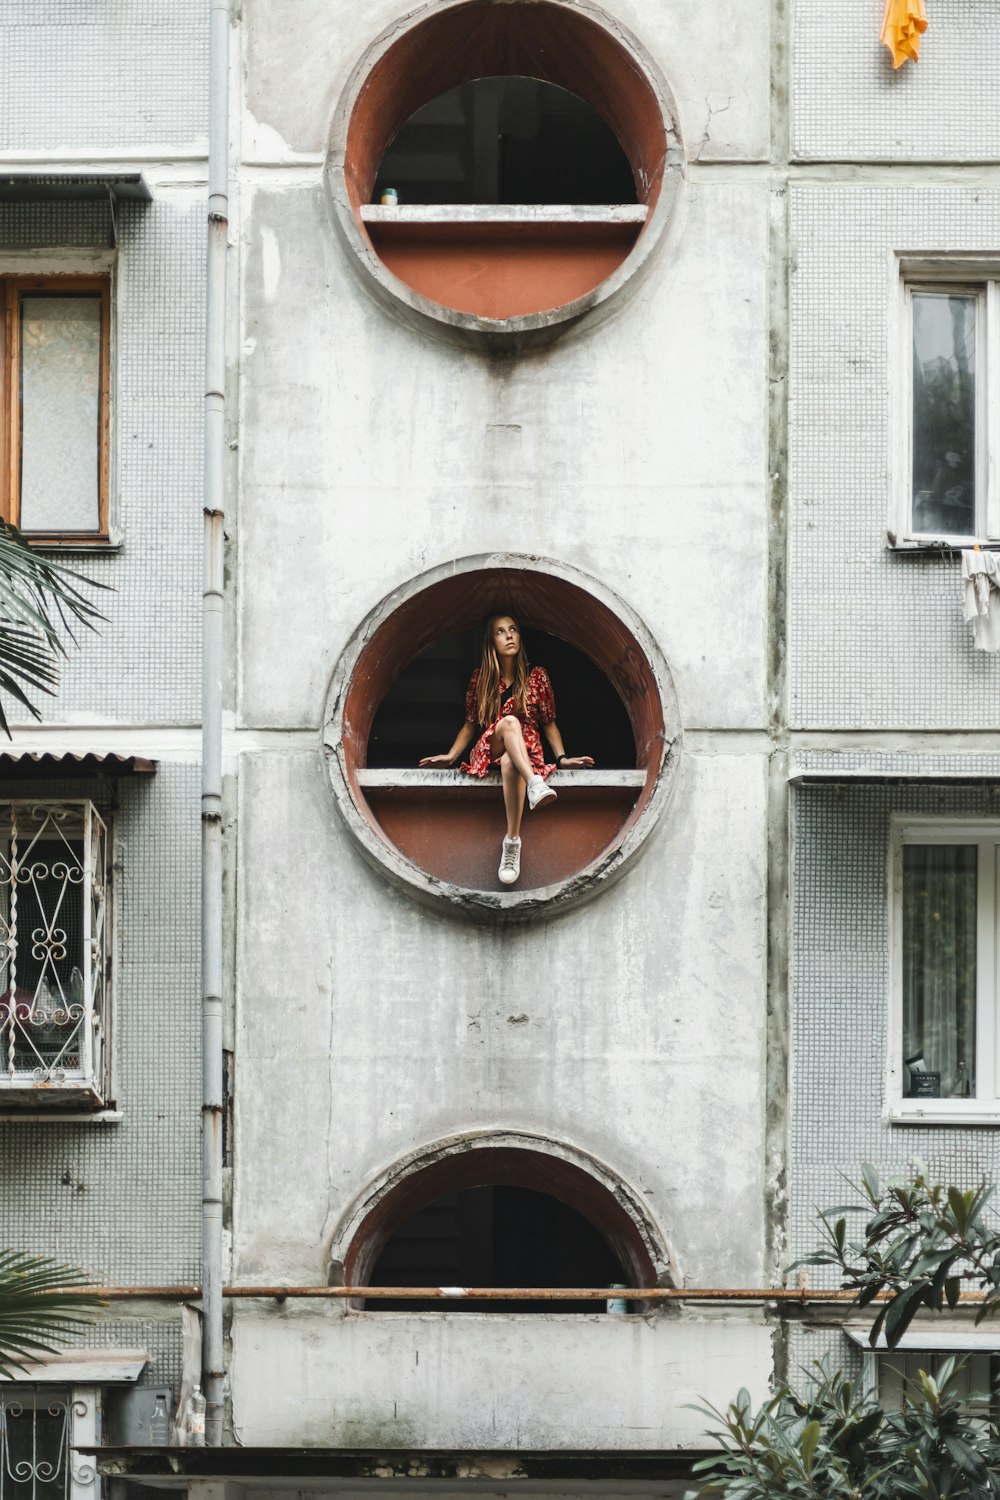 a woman sitting in a round window of a building